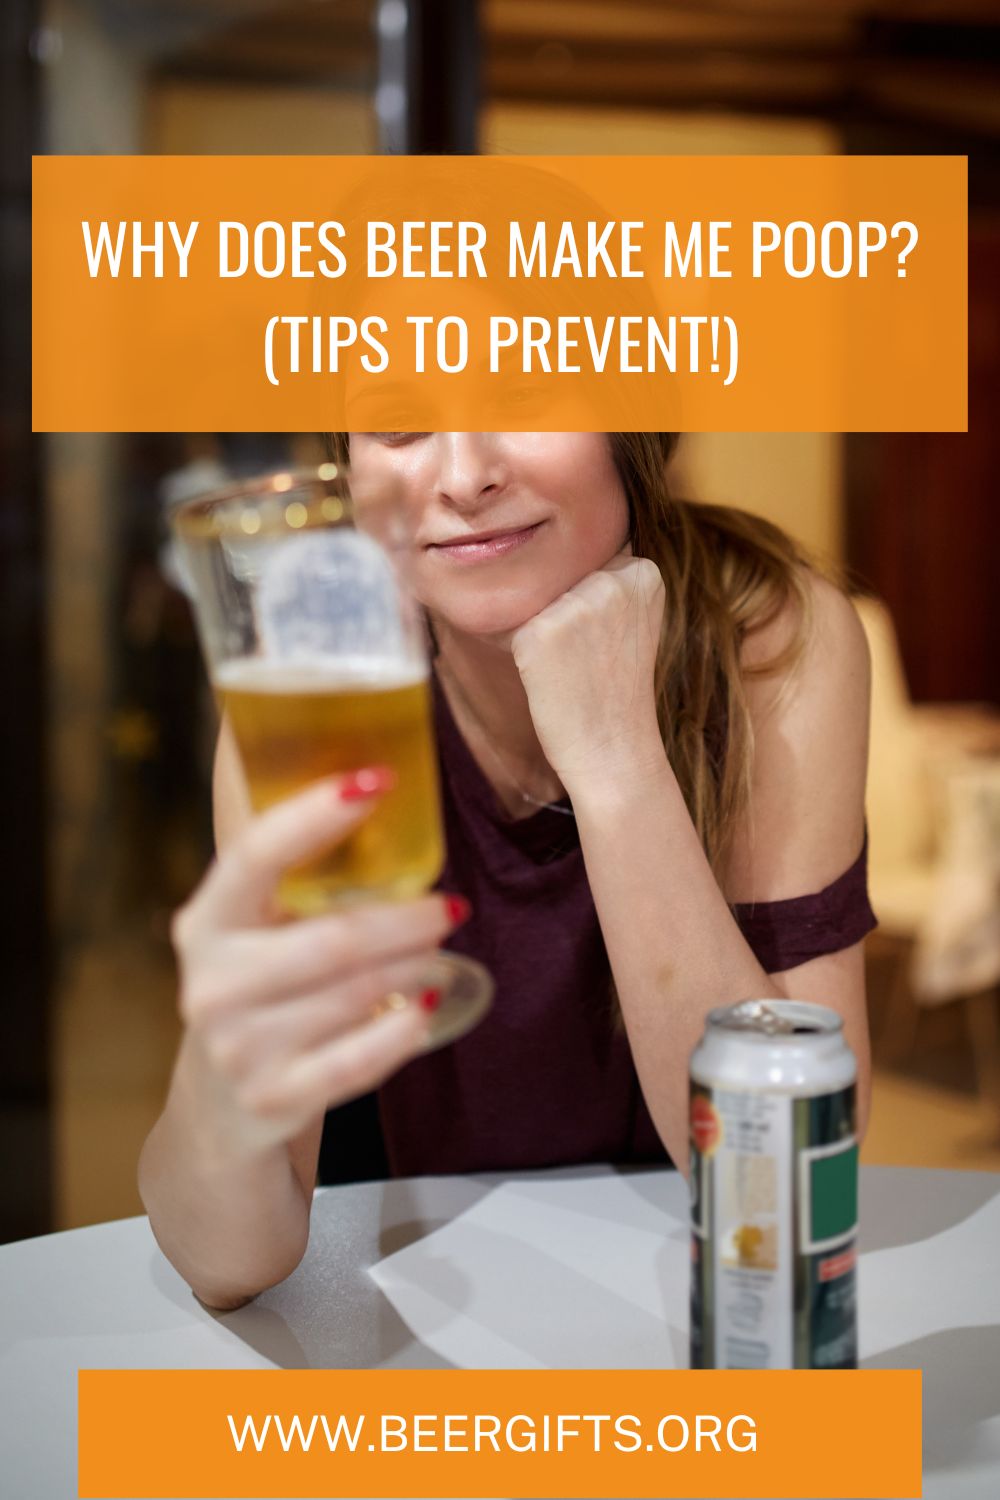 Why Does Beer Make Me Poop? (Tips to Prevent!)6